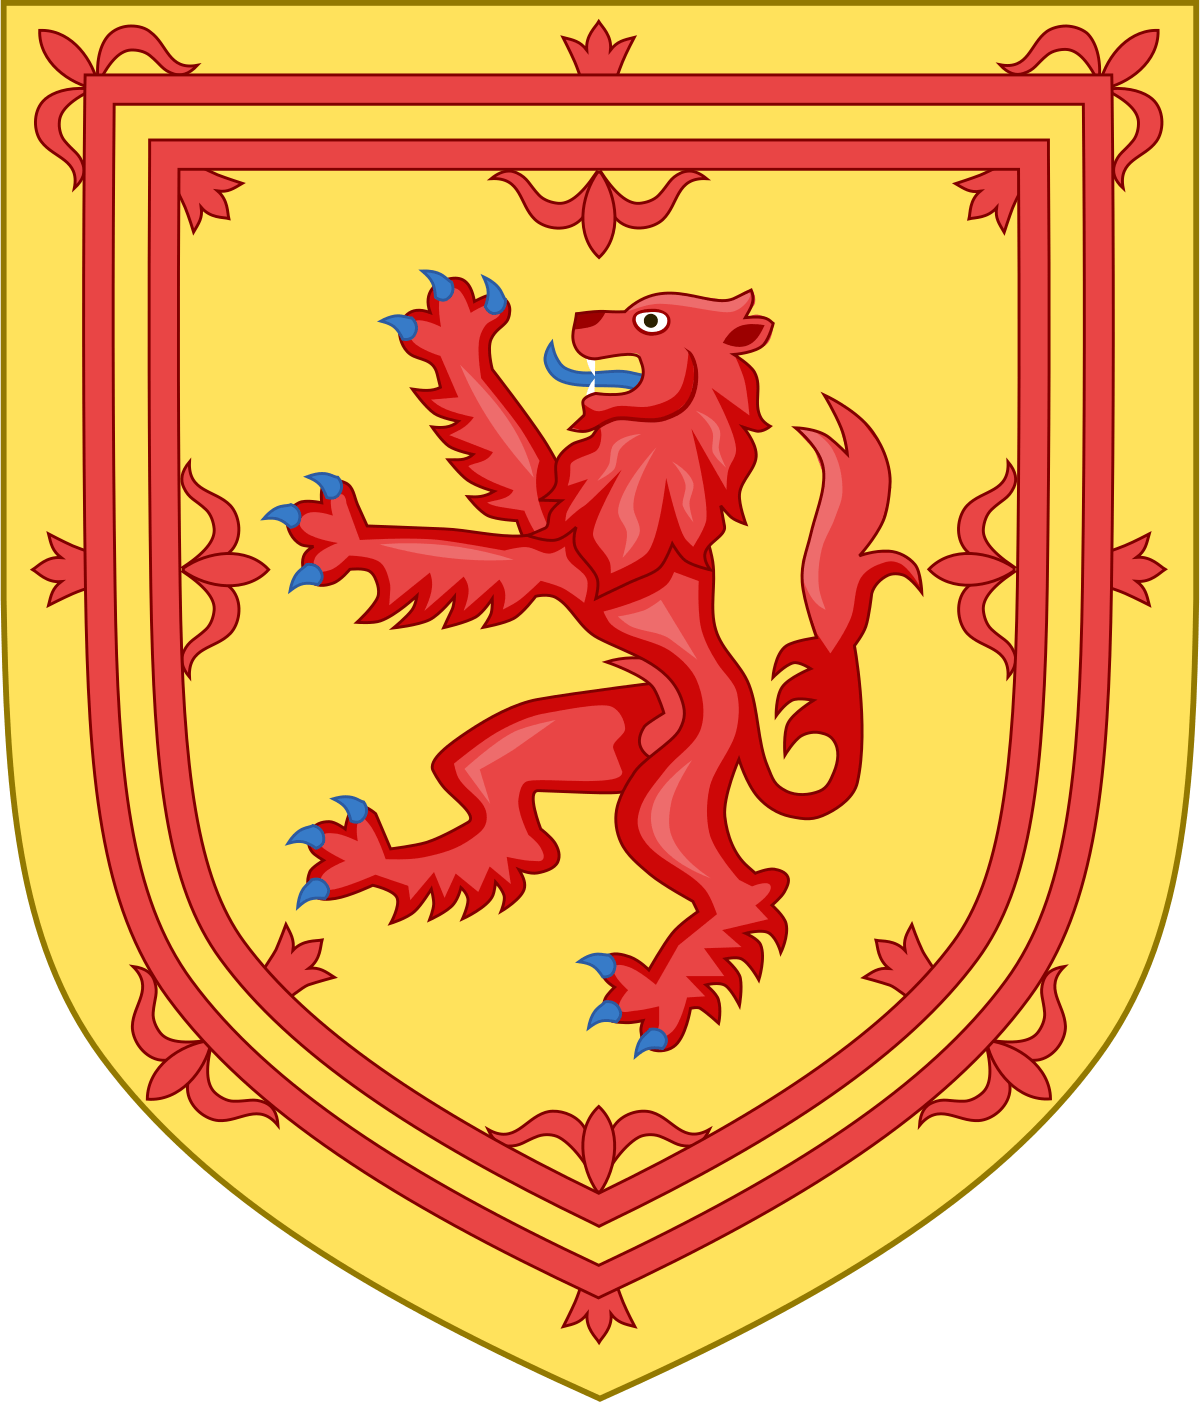 Red Lion with Crown Logo - Royal Arms of Scotland